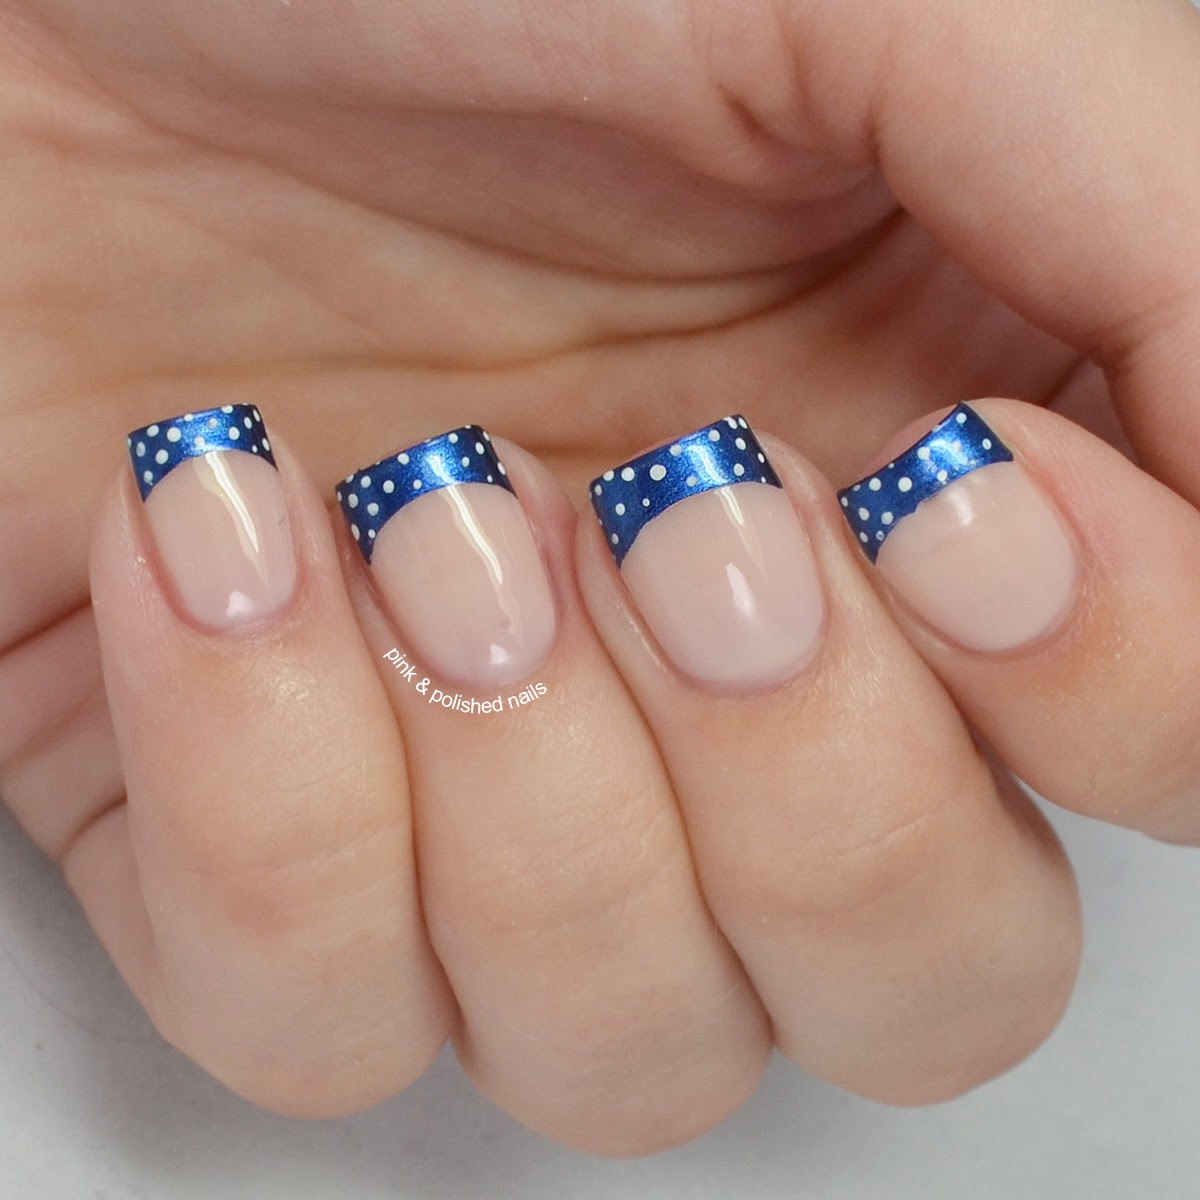 French Tip Nail Ideas
 Pink & Polished Navy french tips with white baby dots